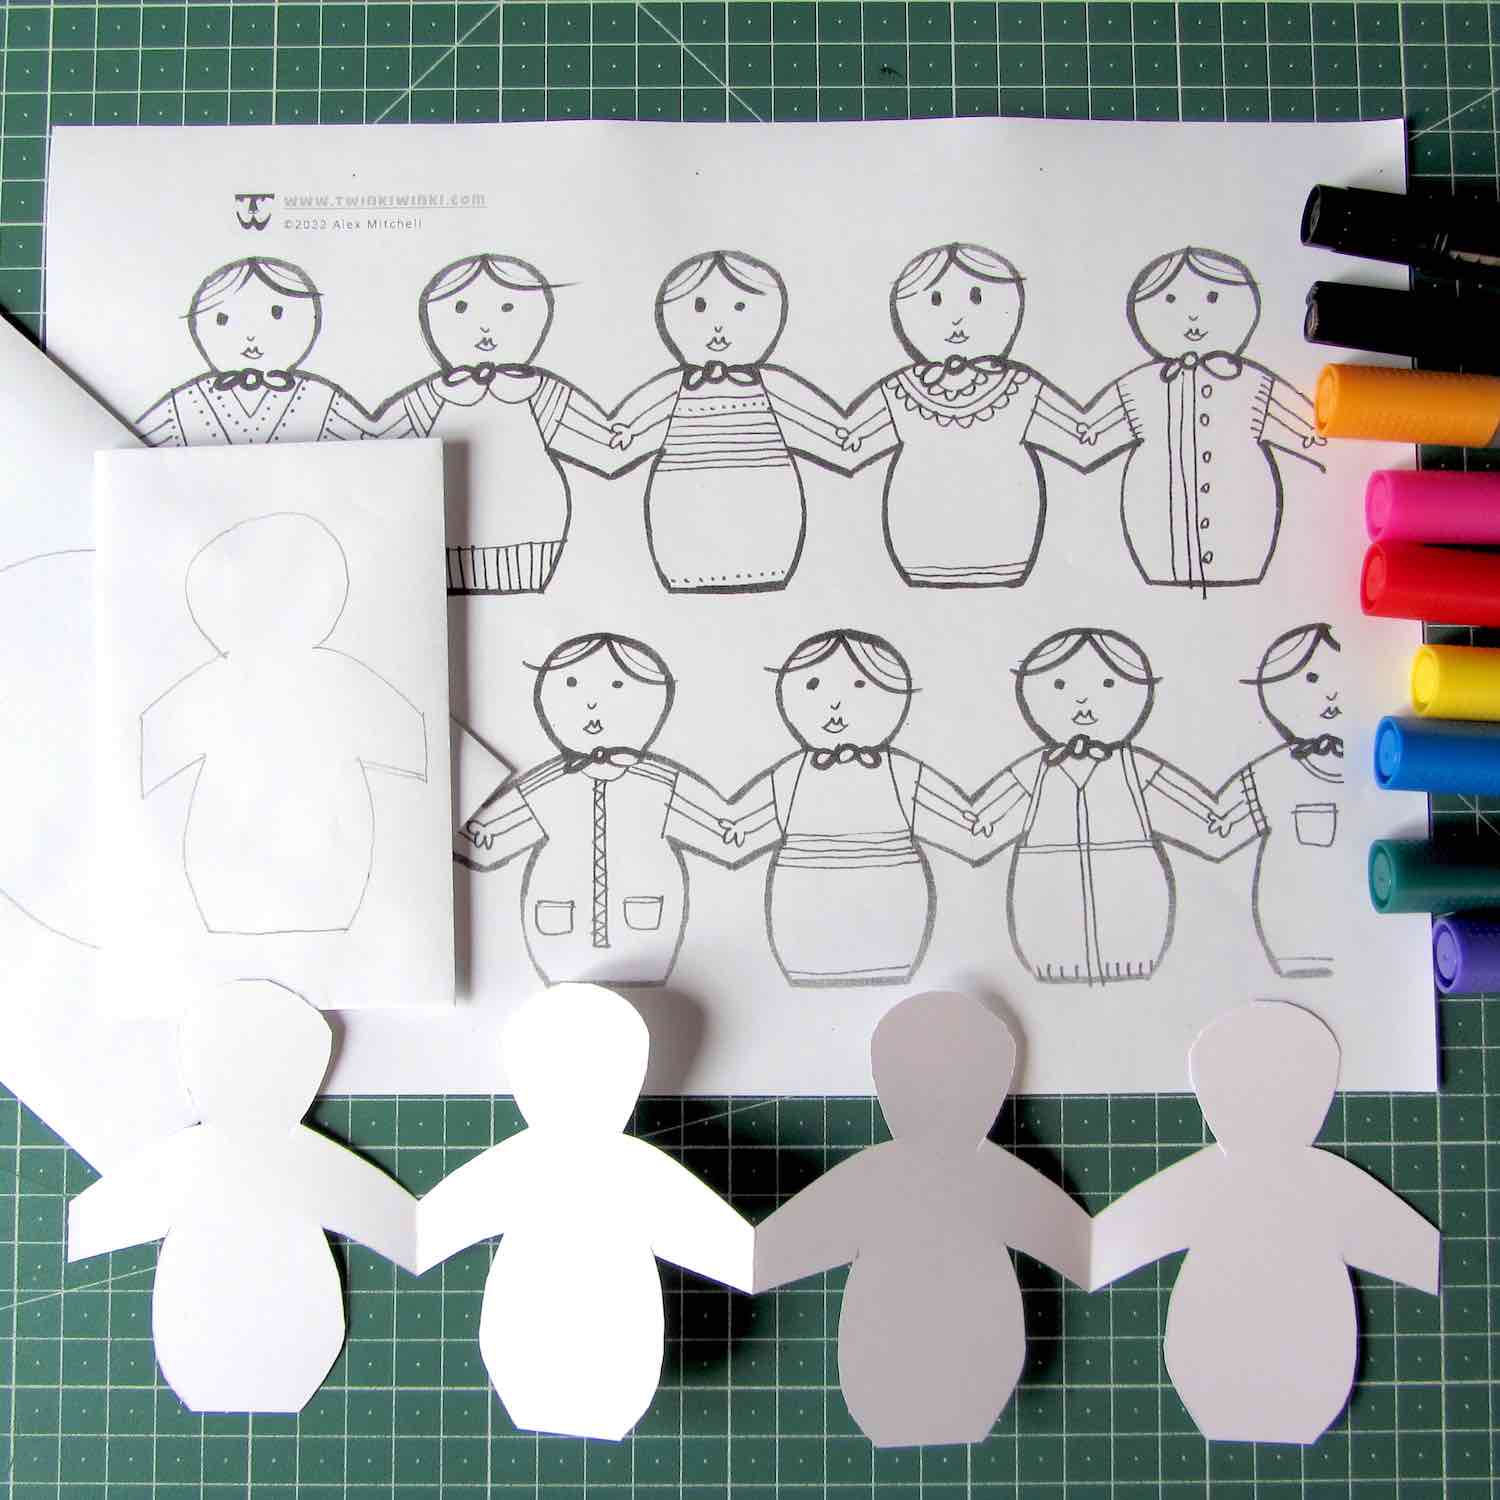 White envelopes and a paper doll chain on top of a cute coloring page with colorful markers on the right.